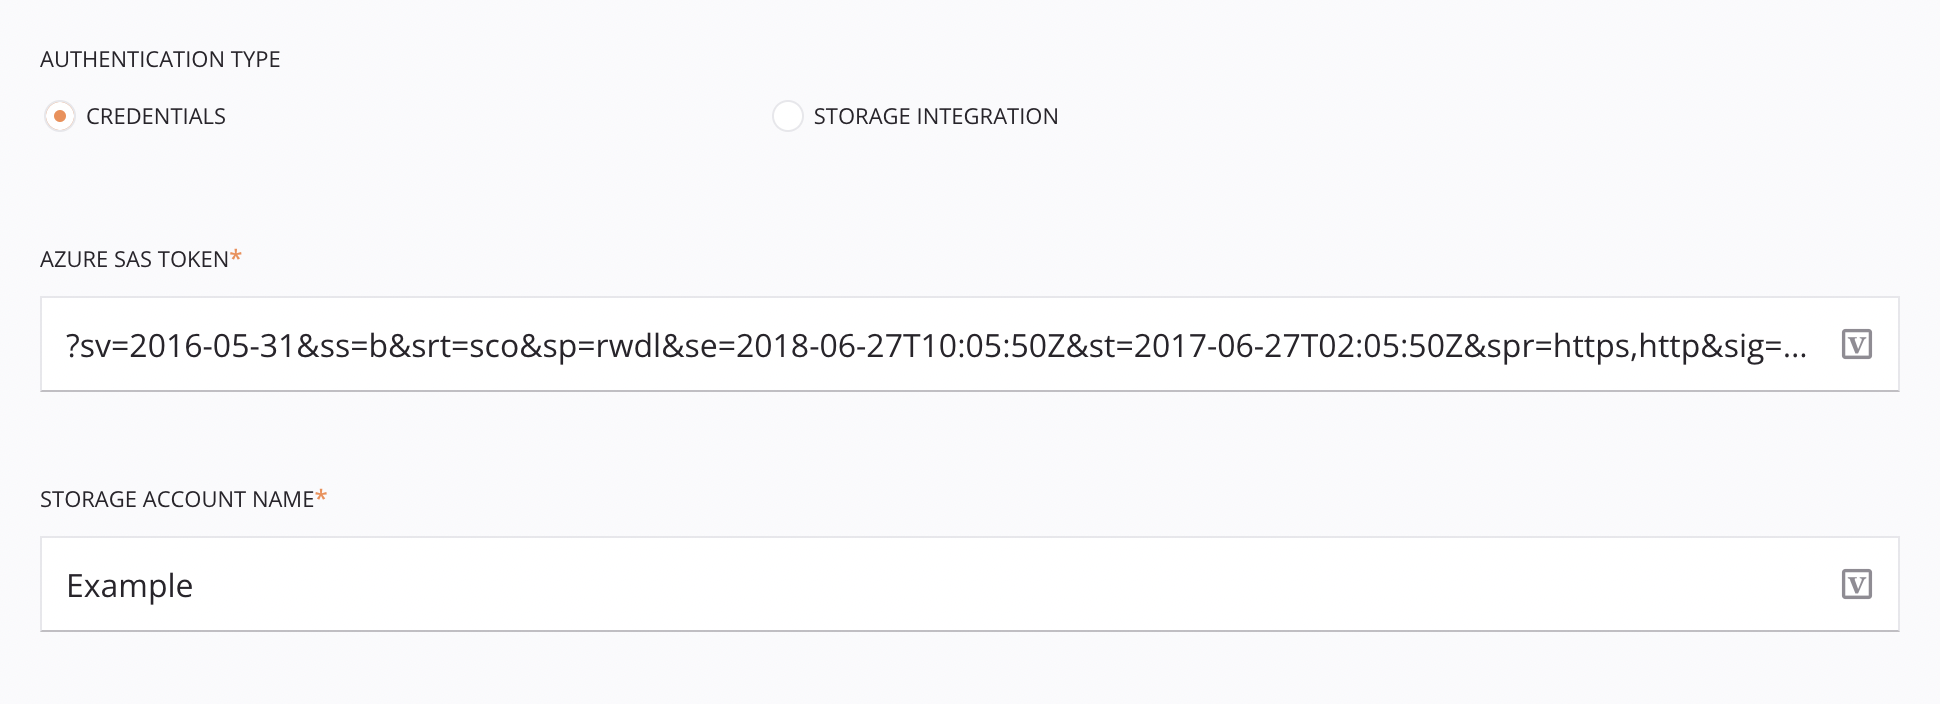 Snowflake Insert Activity Configuration Step 2 Microsoft Azure Stage File Approach Credentials